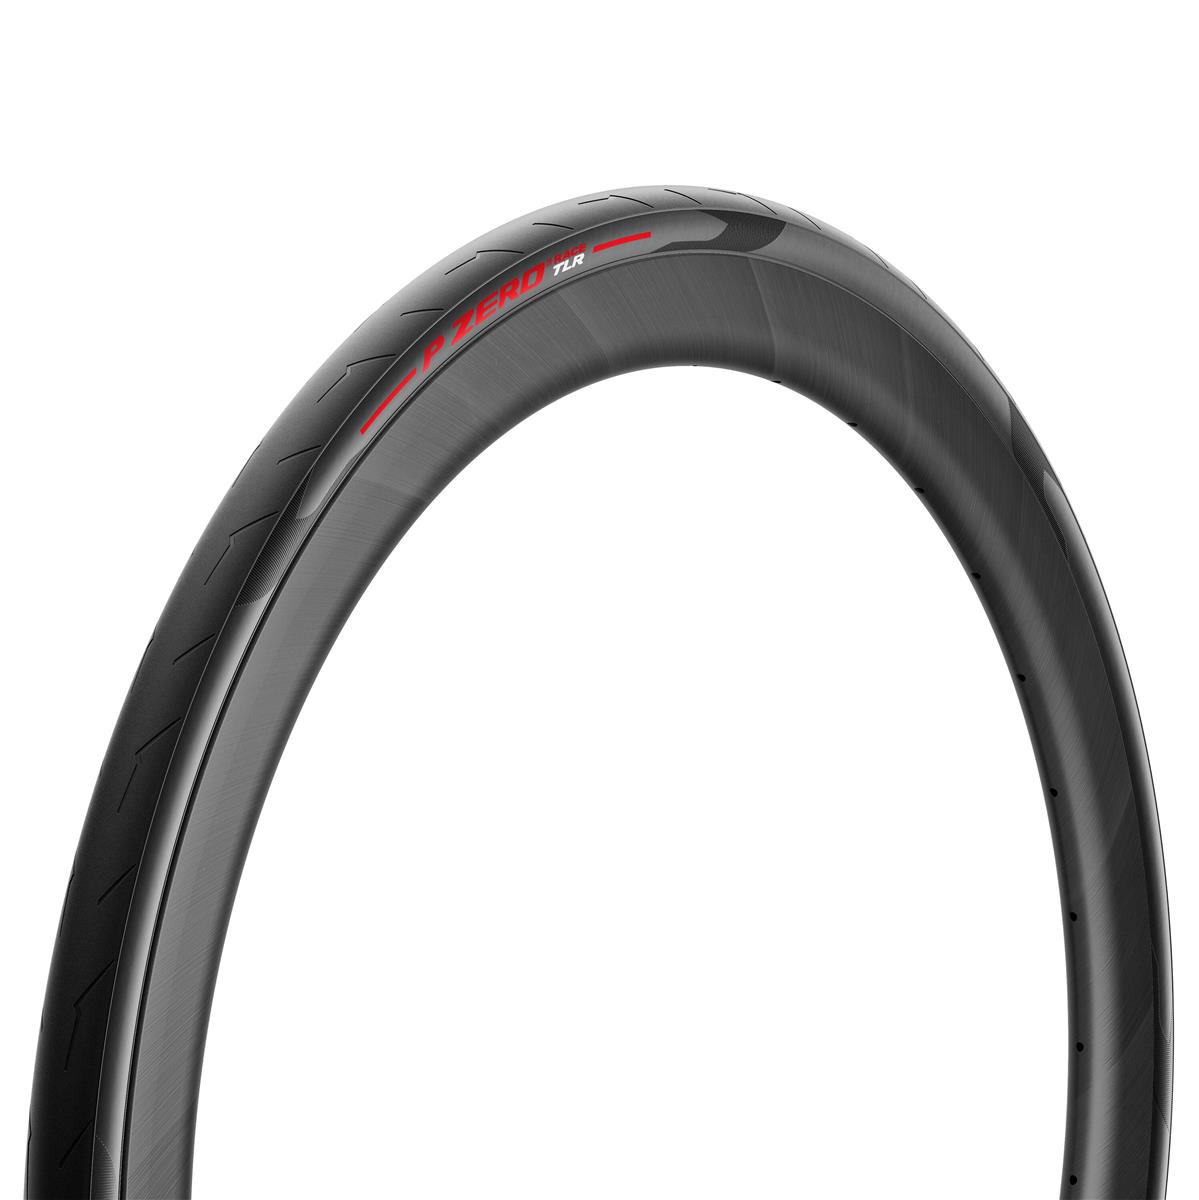 Tire P ZERO Race TLR 700x28c Tubeless Ready Red